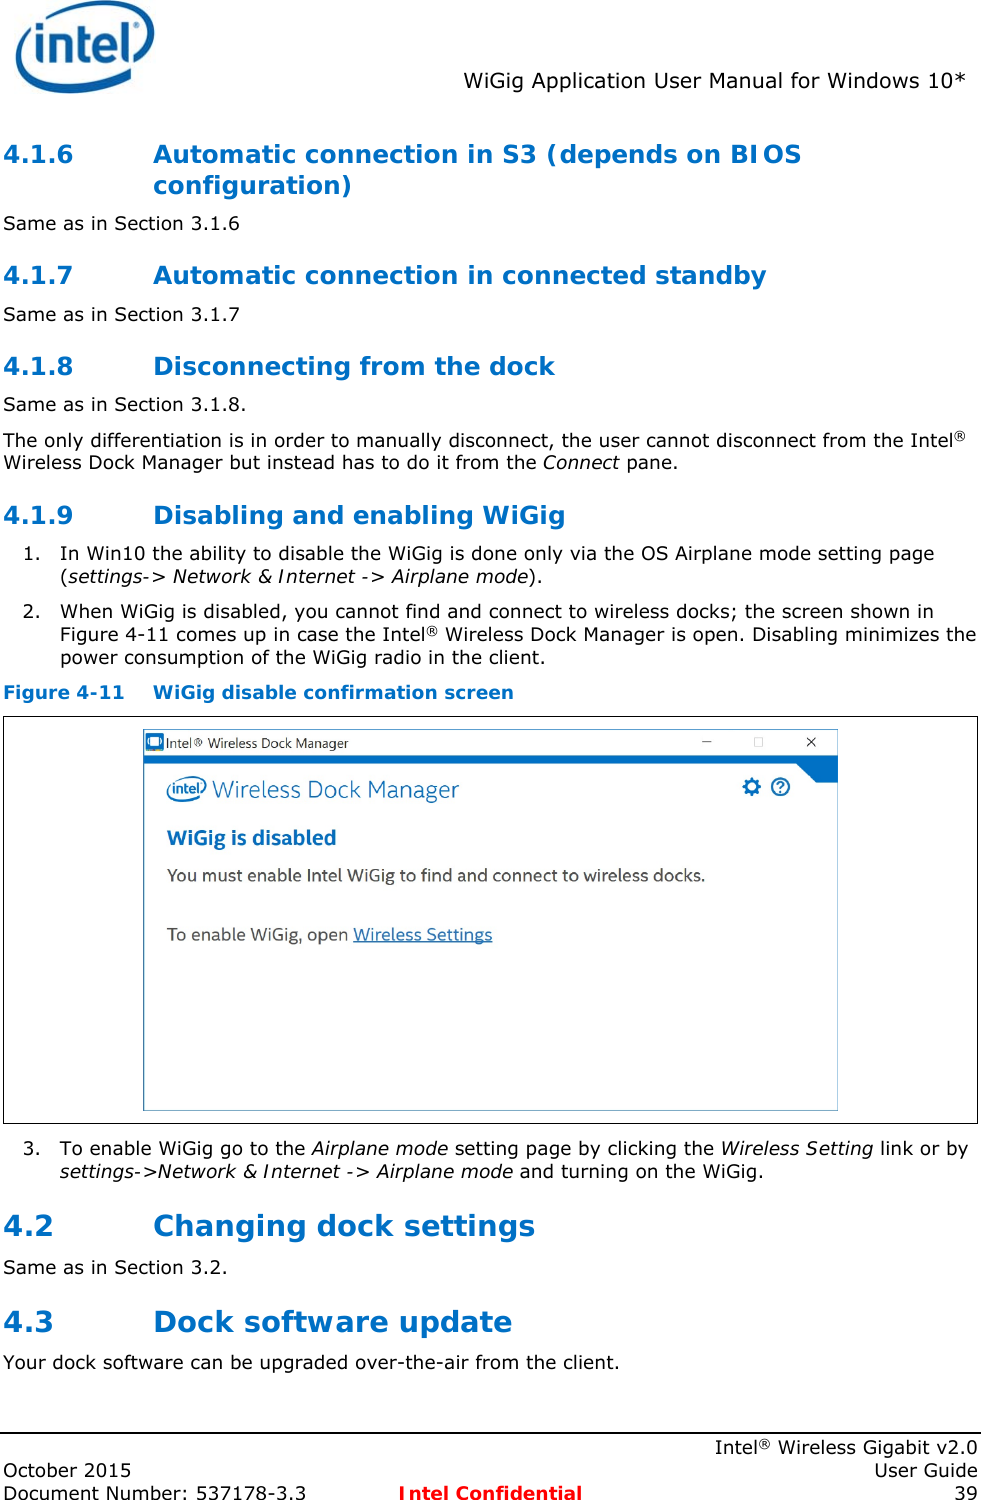  WiGig Application User Manual for Windows 10*    Intel® Wireless Gigabit v2.0 October 2015    User Guide Document Number: 537178-3.3  Intel Confidential 39 4.1.6 Automatic connection in S3 (depends on BIOS configuration) Same as in Section 3.1.6 4.1.7 Automatic connection in connected standby Same as in Section 3.1.7 4.1.8 Disconnecting from the dock Same as in Section 3.1.8. The only differentiation is in order to manually disconnect, the user cannot disconnect from the Intel® Wireless Dock Manager but instead has to do it from the Connect pane. 4.1.9 Disabling and enabling WiGig 1. In Win10 the ability to disable the WiGig is done only via the OS Airplane mode setting page (settings-&gt; Network &amp; Internet -&gt; Airplane mode). 2. When WiGig is disabled, you cannot find and connect to wireless docks; the screen shown in Figure 4-11 comes up in case the Intel® Wireless Dock Manager is open. Disabling minimizes the power consumption of the WiGig radio in the client. Figure 4-11  WiGig disable confirmation screen  3. To enable WiGig go to the Airplane mode setting page by clicking the Wireless Setting link or by settings-&gt;Network &amp; Internet -&gt; Airplane mode and turning on the WiGig. 4.2 Changing dock settings Same as in Section 3.2. 4.3 Dock software update Your dock software can be upgraded over-the-air from the client. 